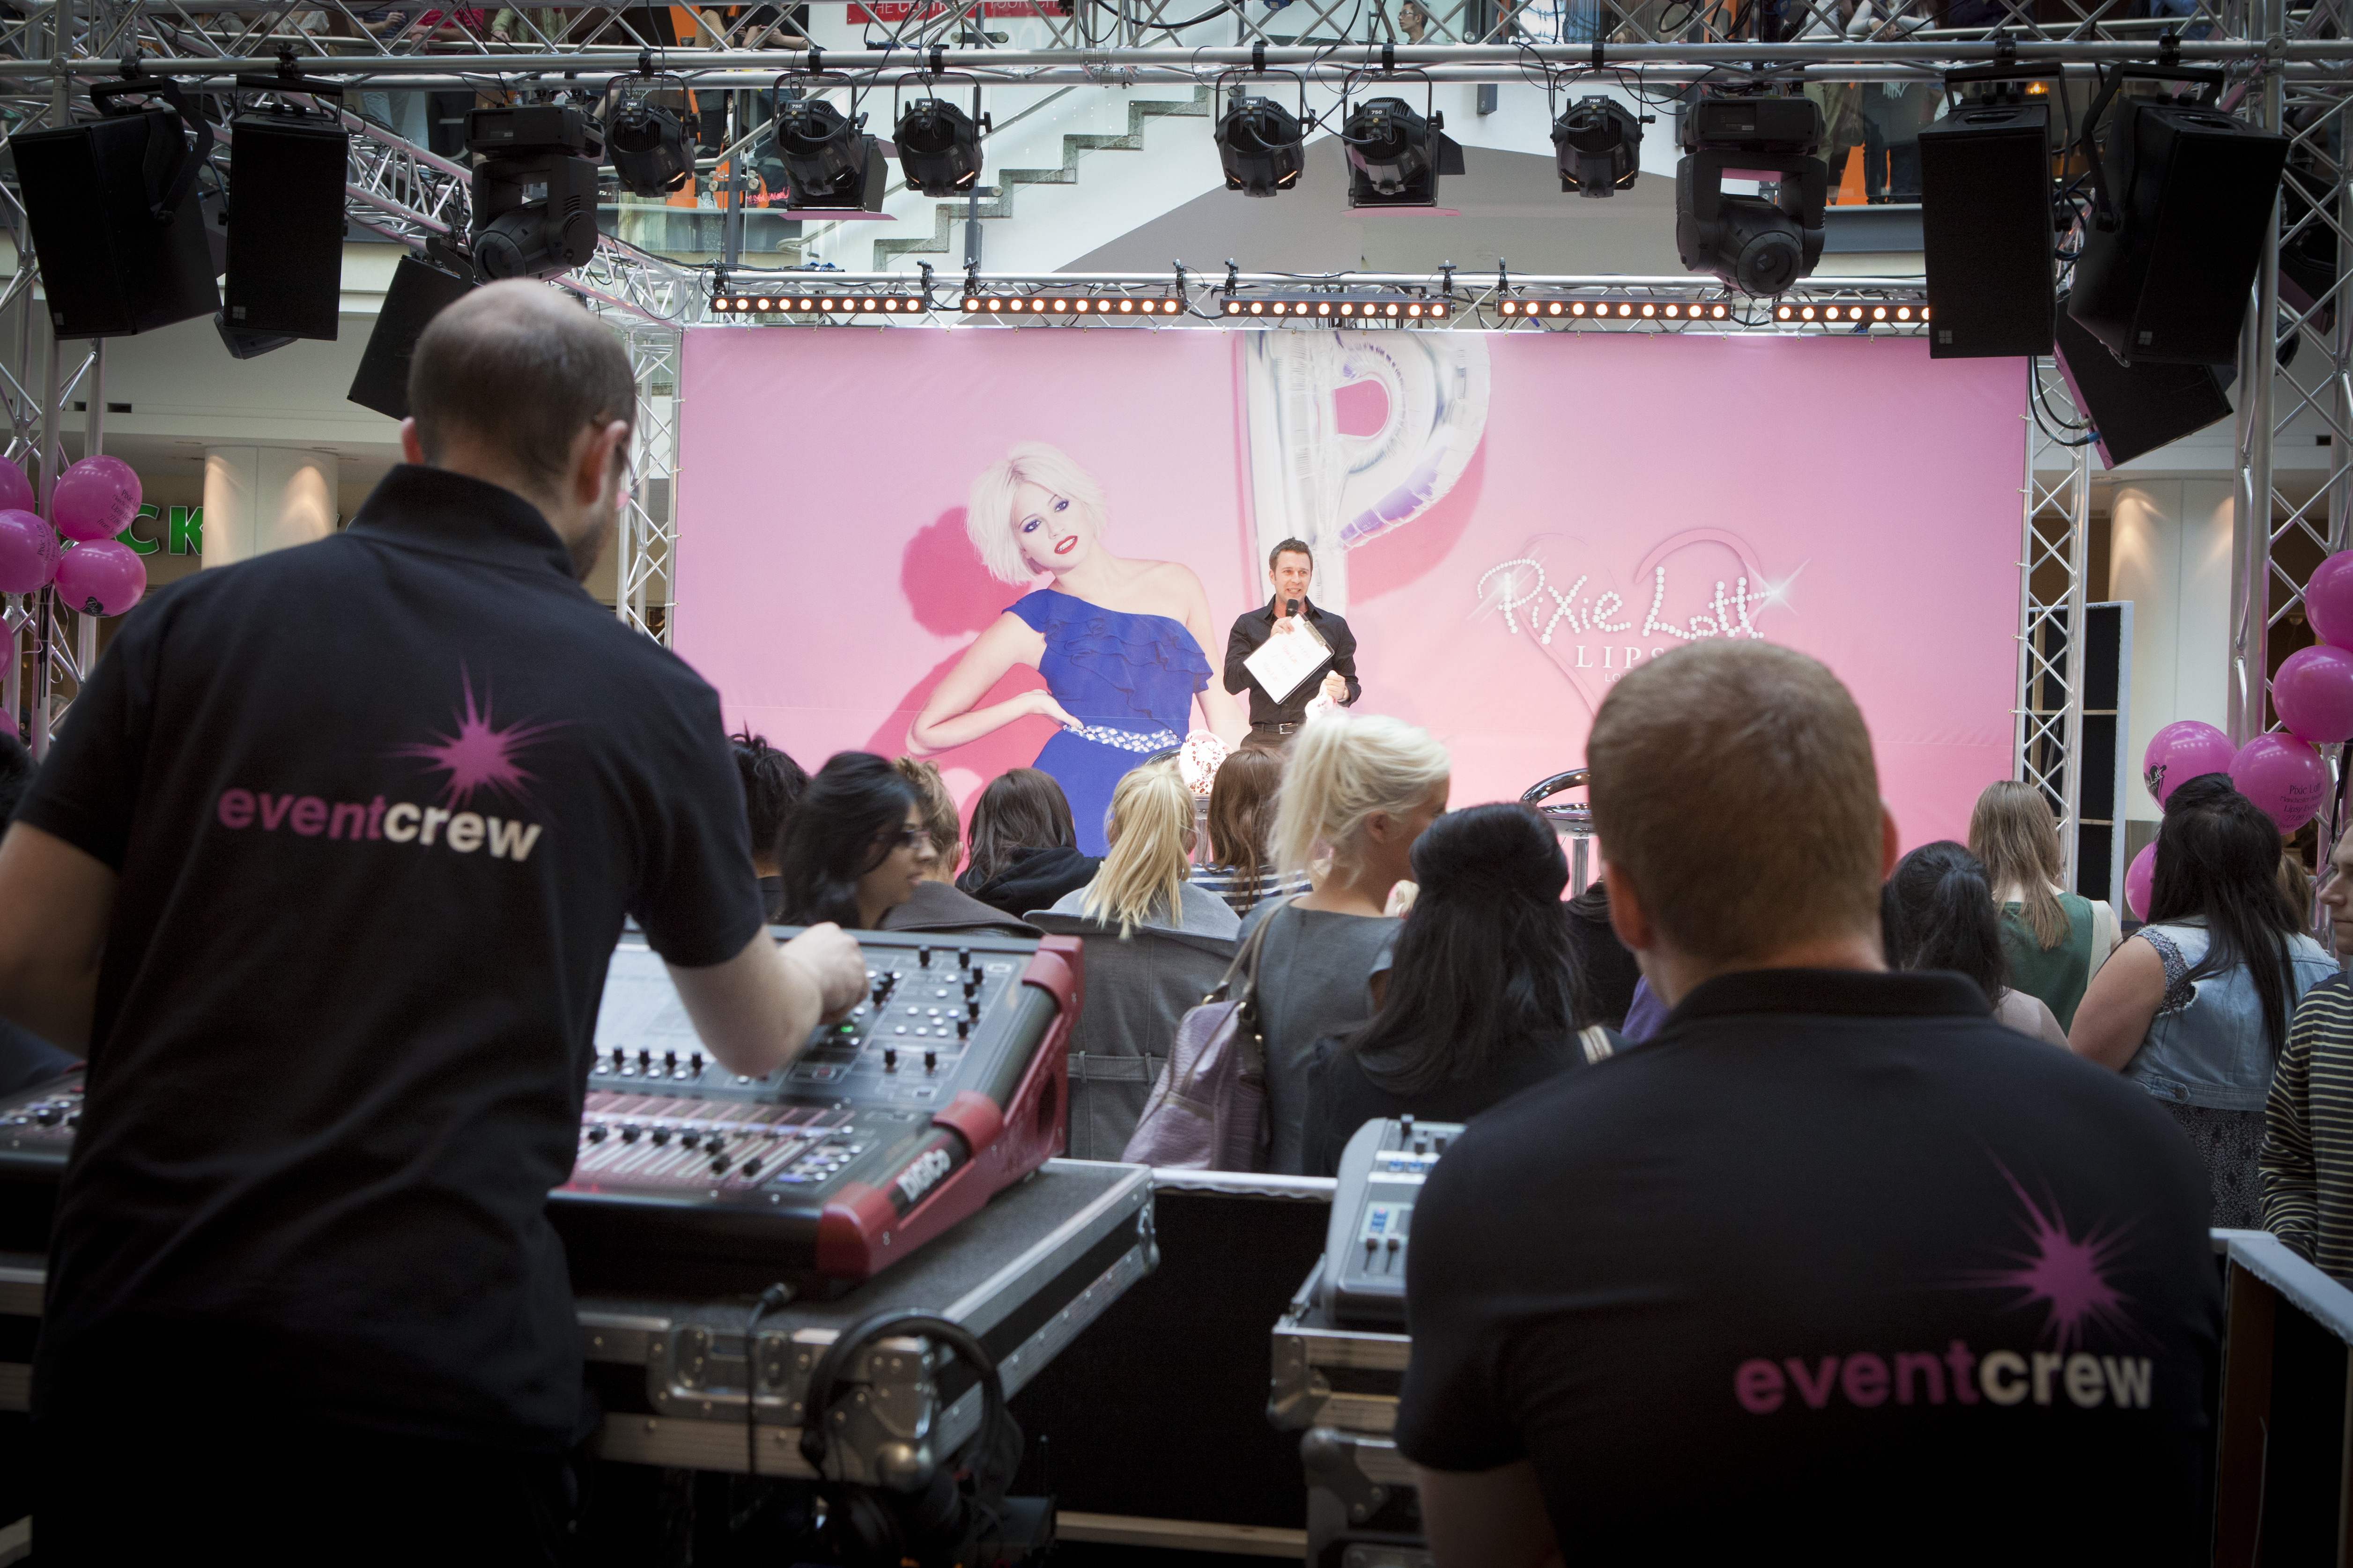 Pictured above is the set up for the launch of Pixie Lott's clothing collection at Lipsy. It includes the sound mixing desk, crew, staging, lighting and truss.